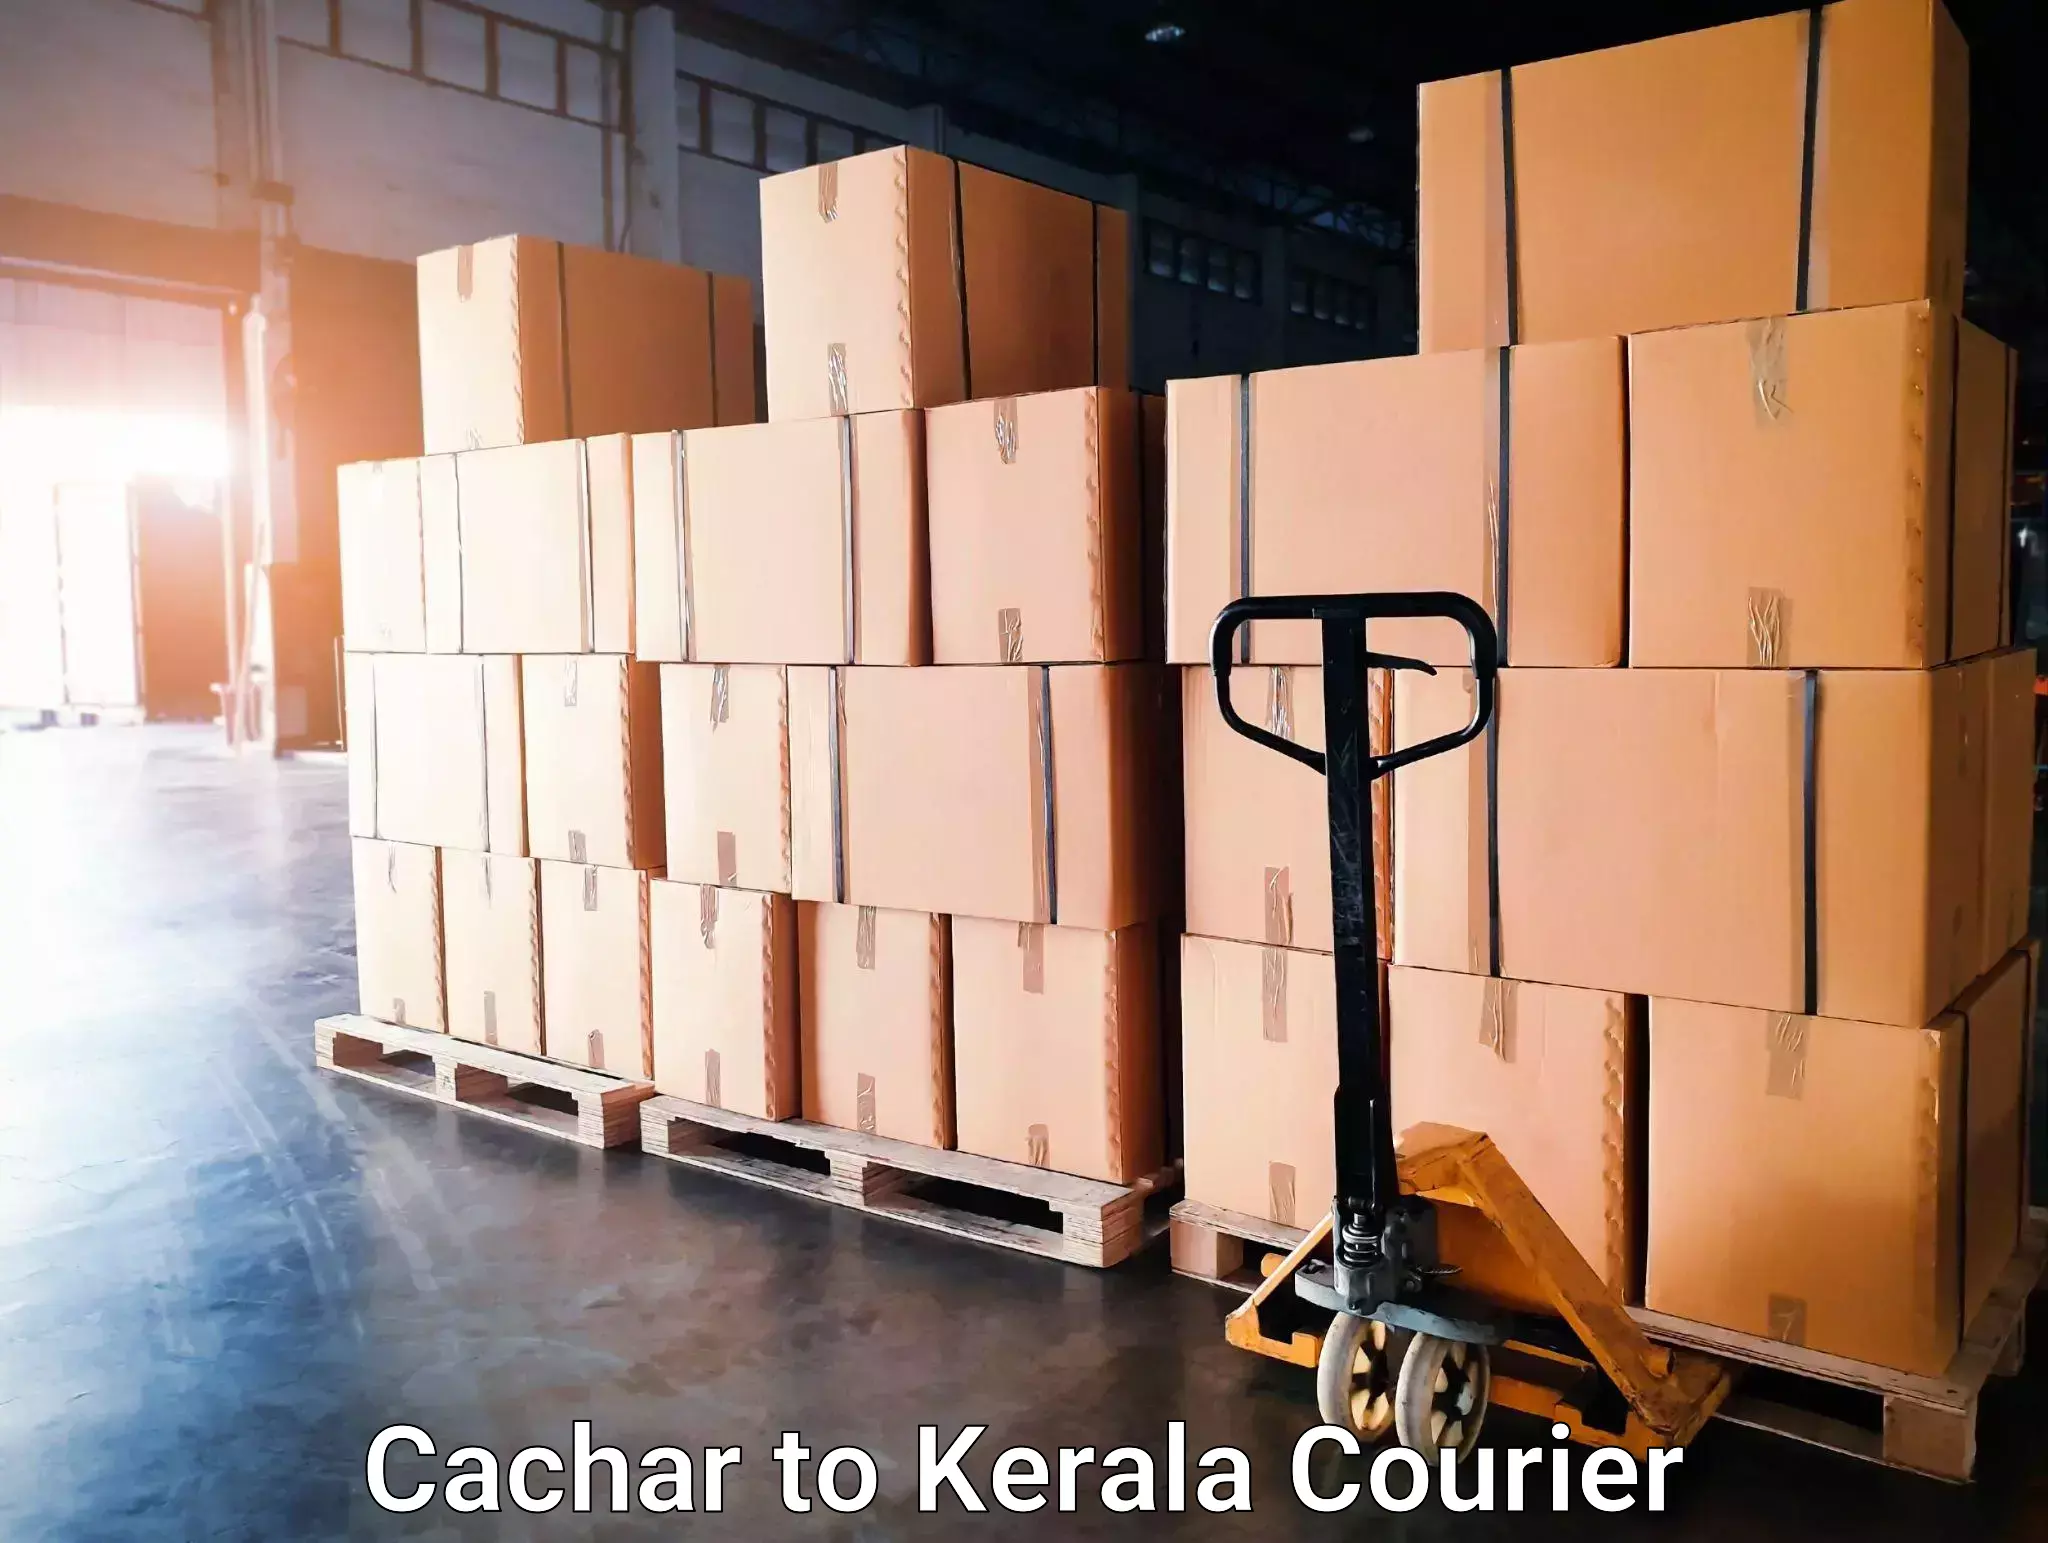 User-friendly delivery service Cachar to Kozhikode